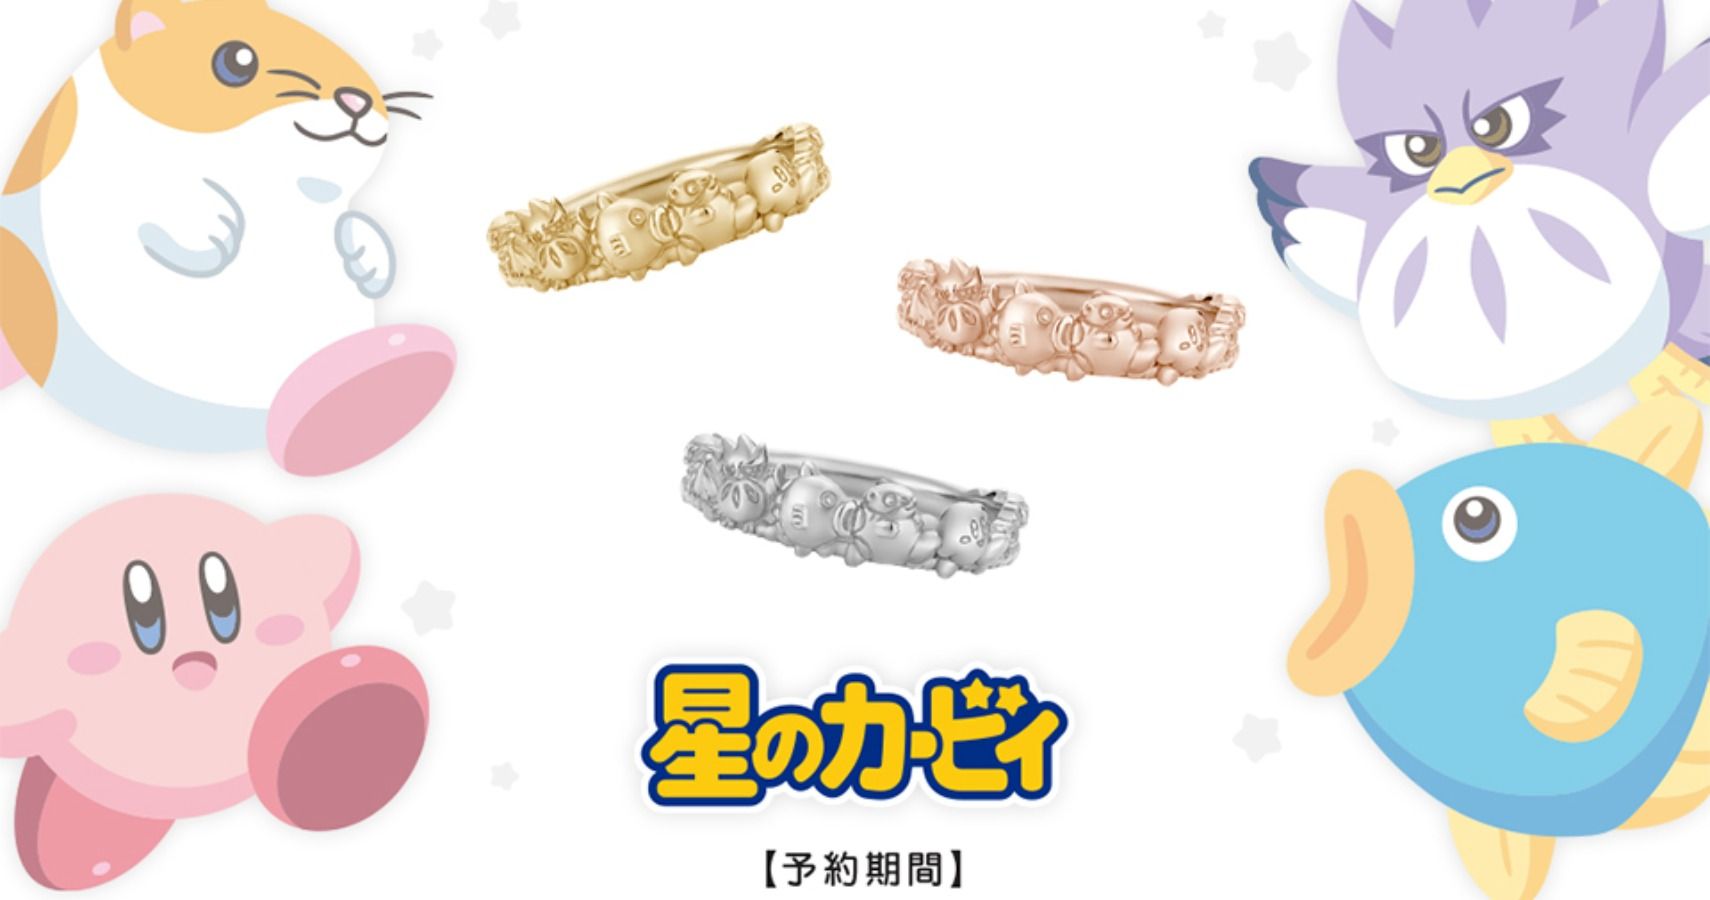 Japanese Jewelry Company UTreasure to Release Kirby And FriendsInspired Rings